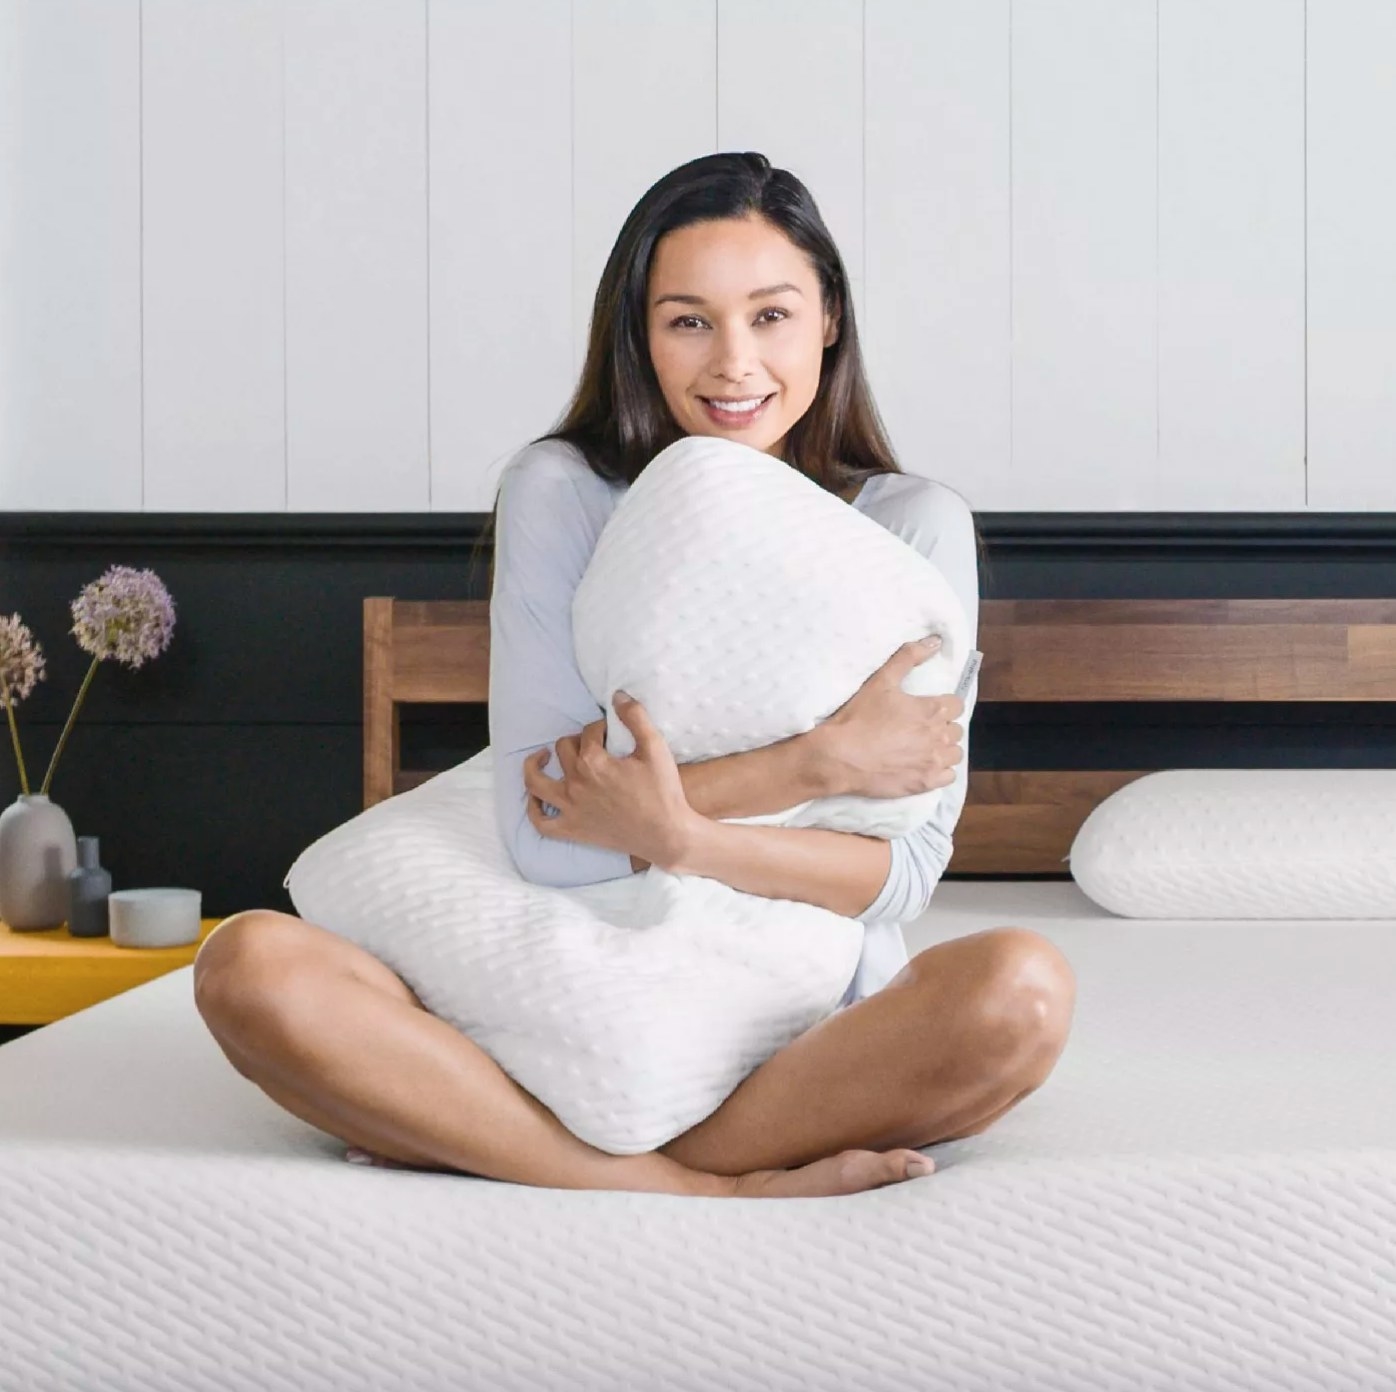 The Tuft and Needle memory foam pillow being held by a model sitting on a bed